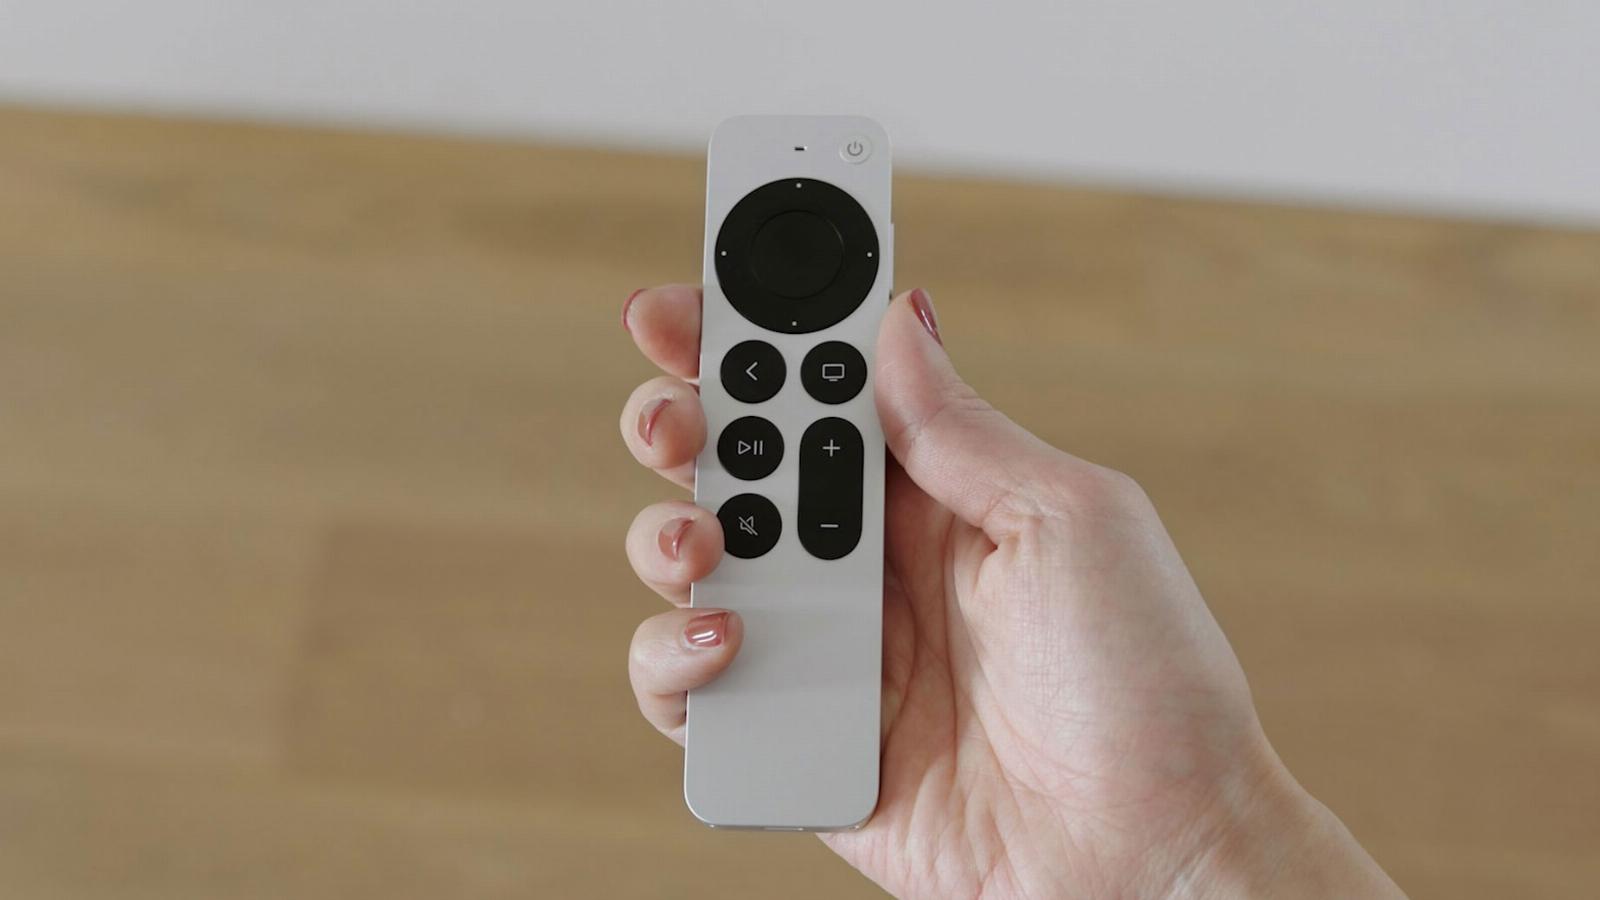 Siri can finally find your lost Apple TV remote